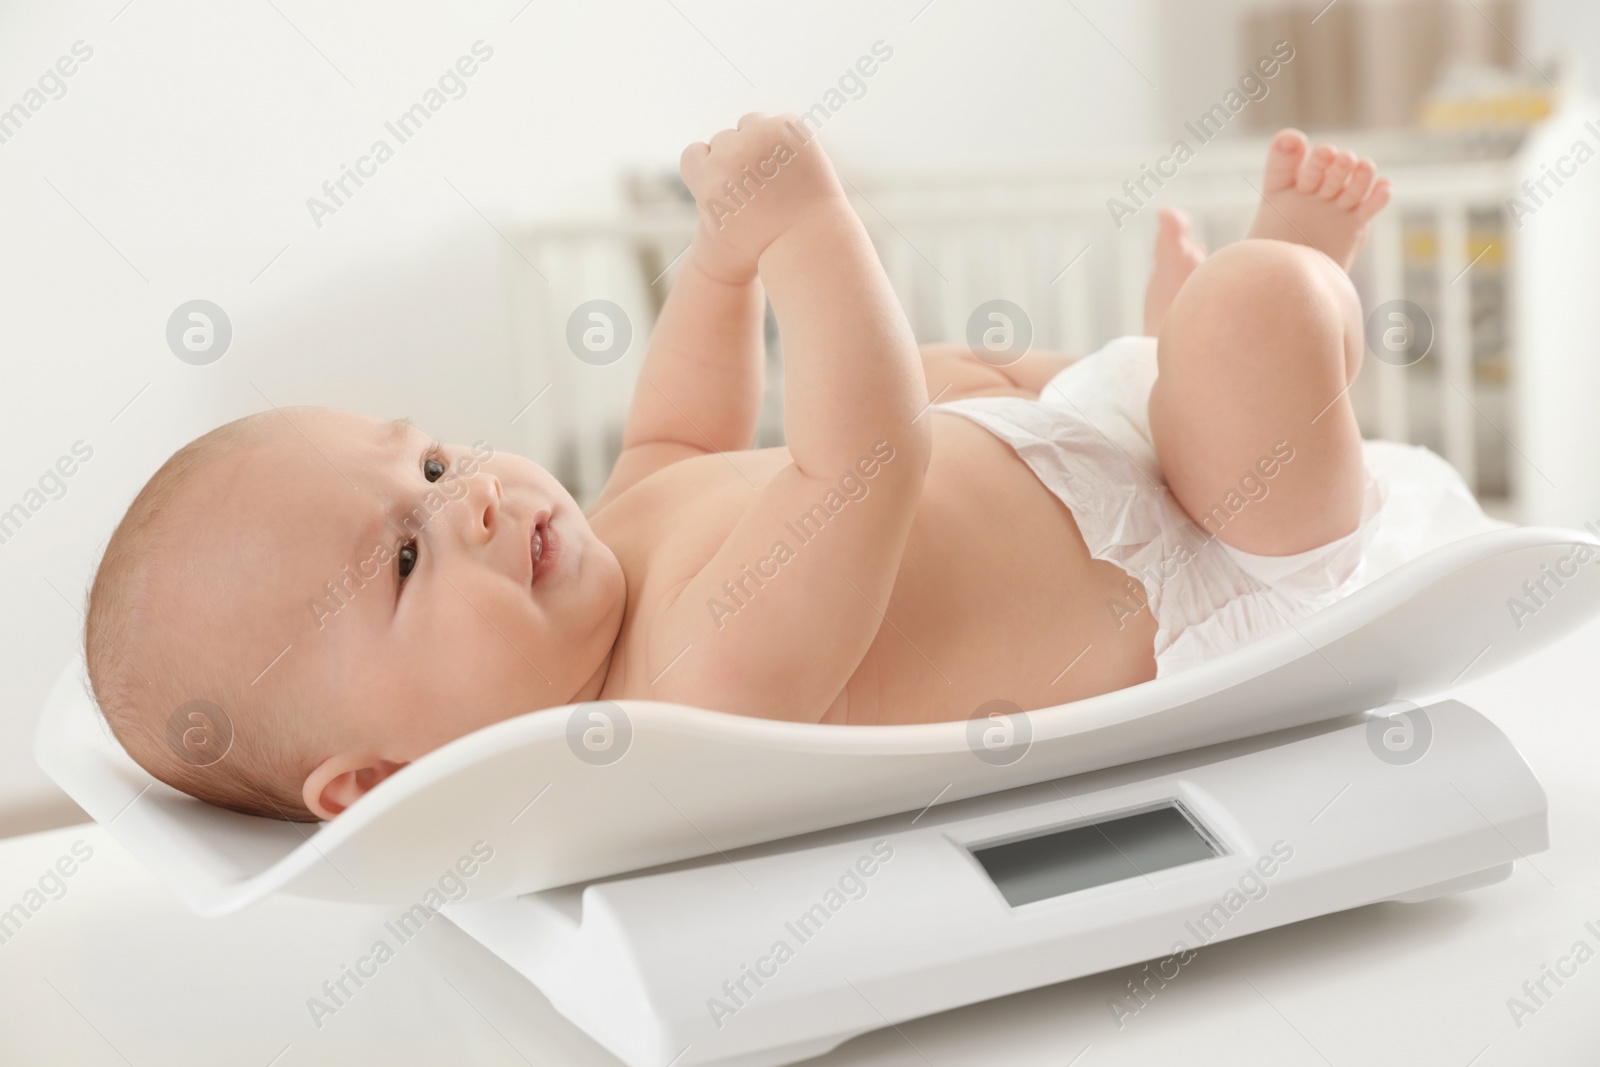 Photo of Cute little baby lying on scales in light room